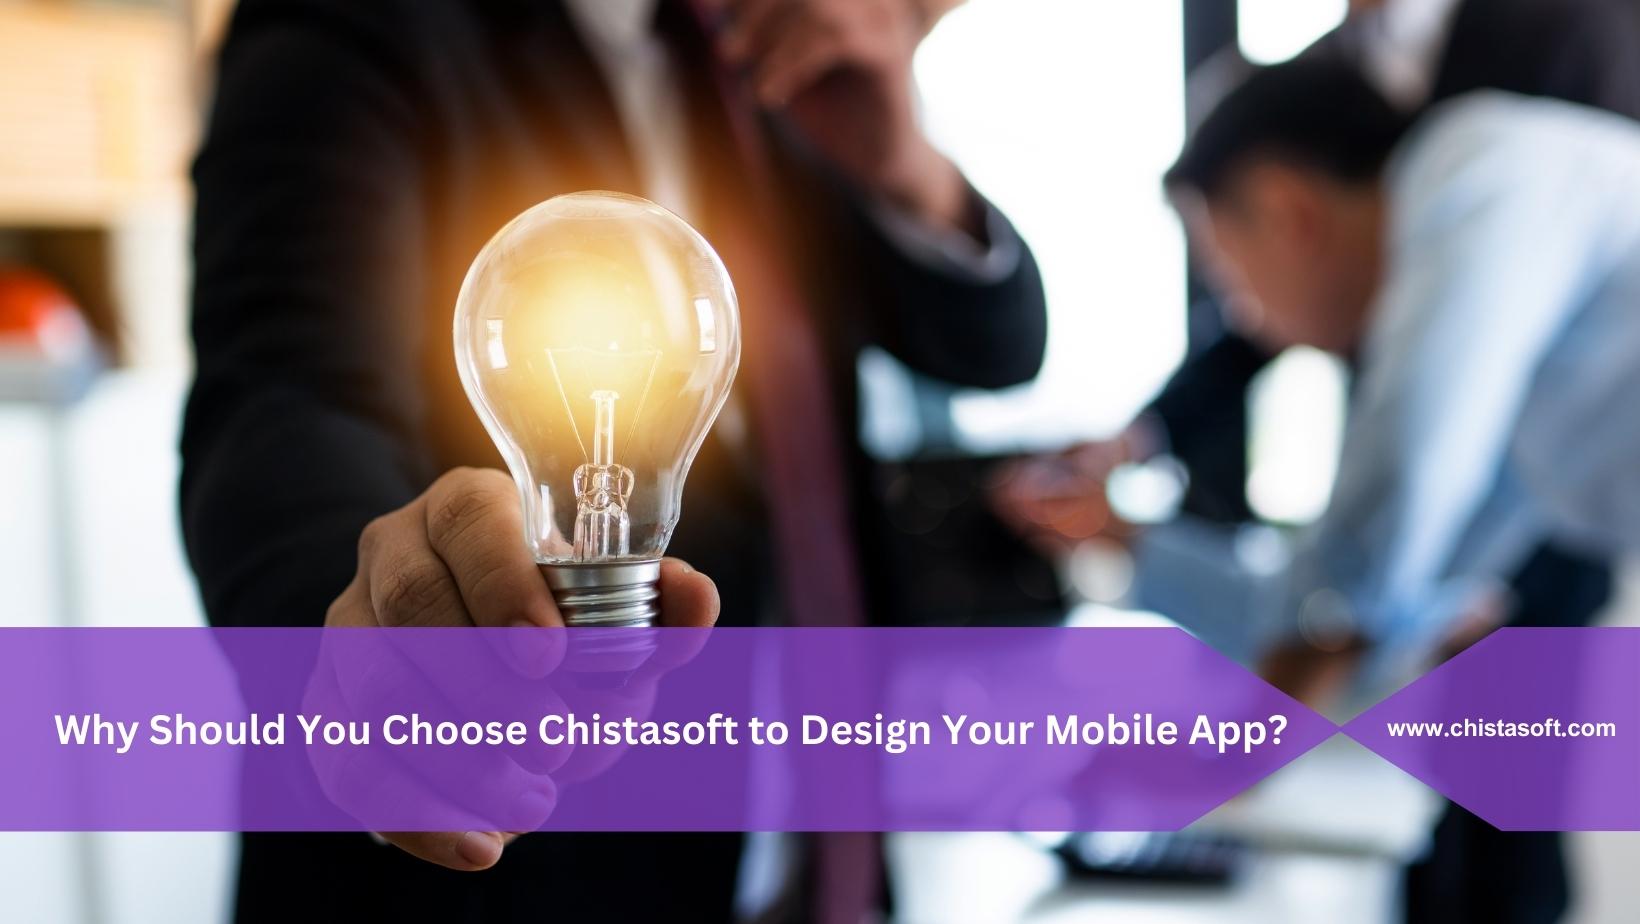 Why Should You Choose Chistasoft to Design Your Mobile App?